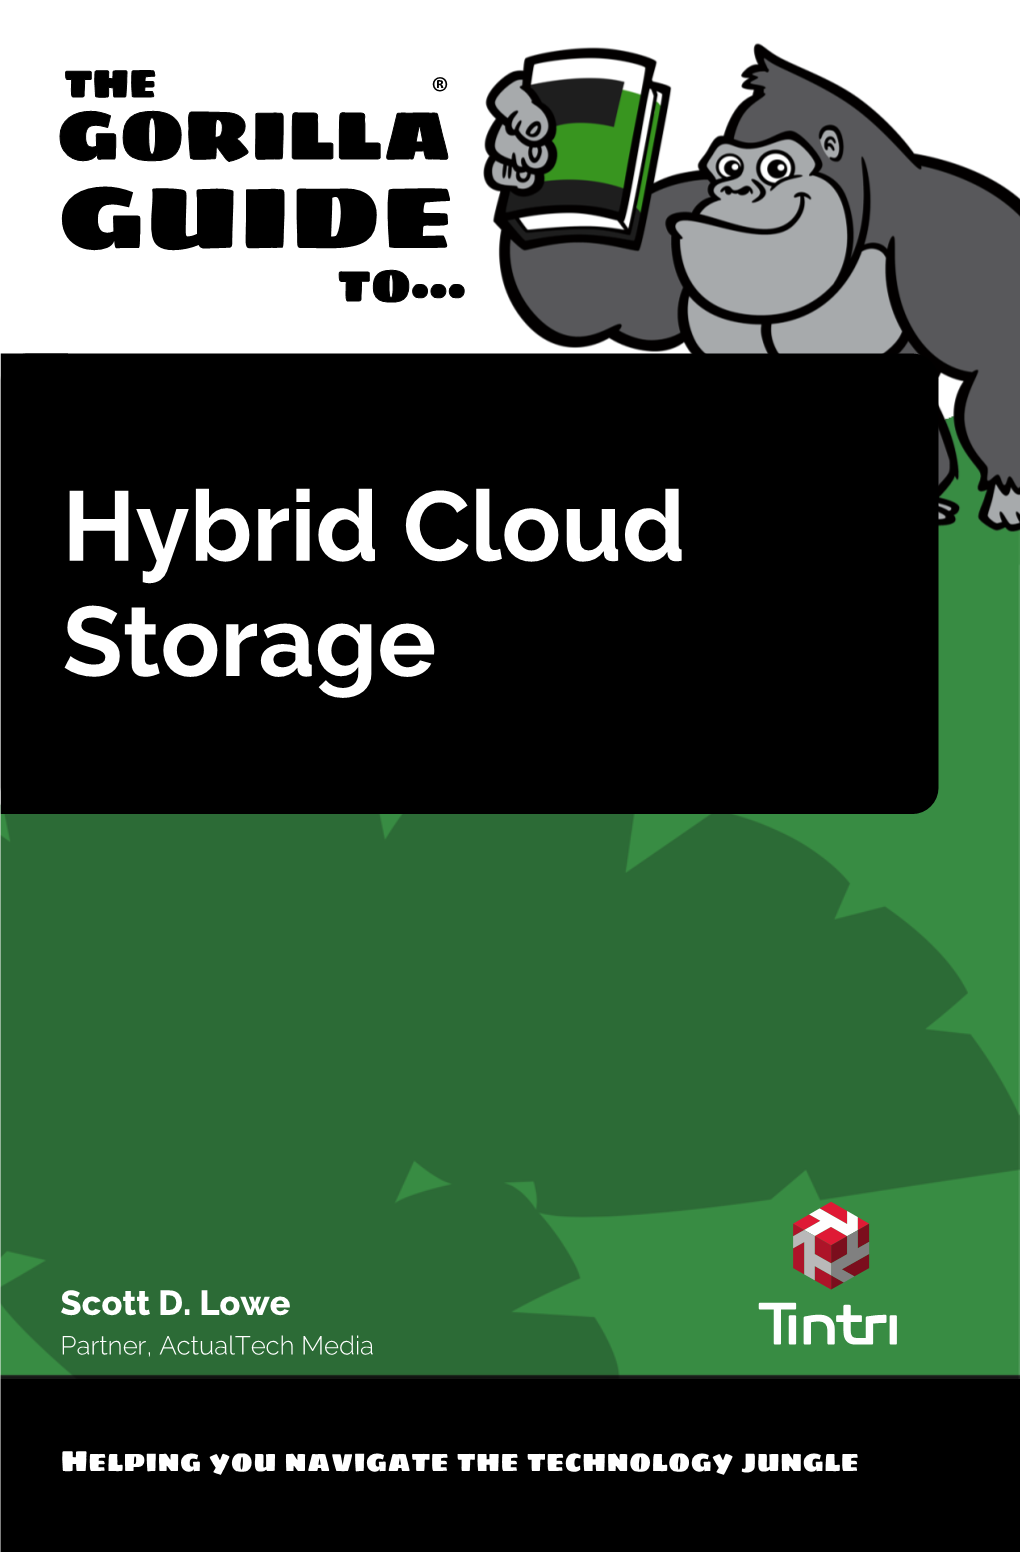 The Gorilla Guide to Storage for Hybrid Cloud